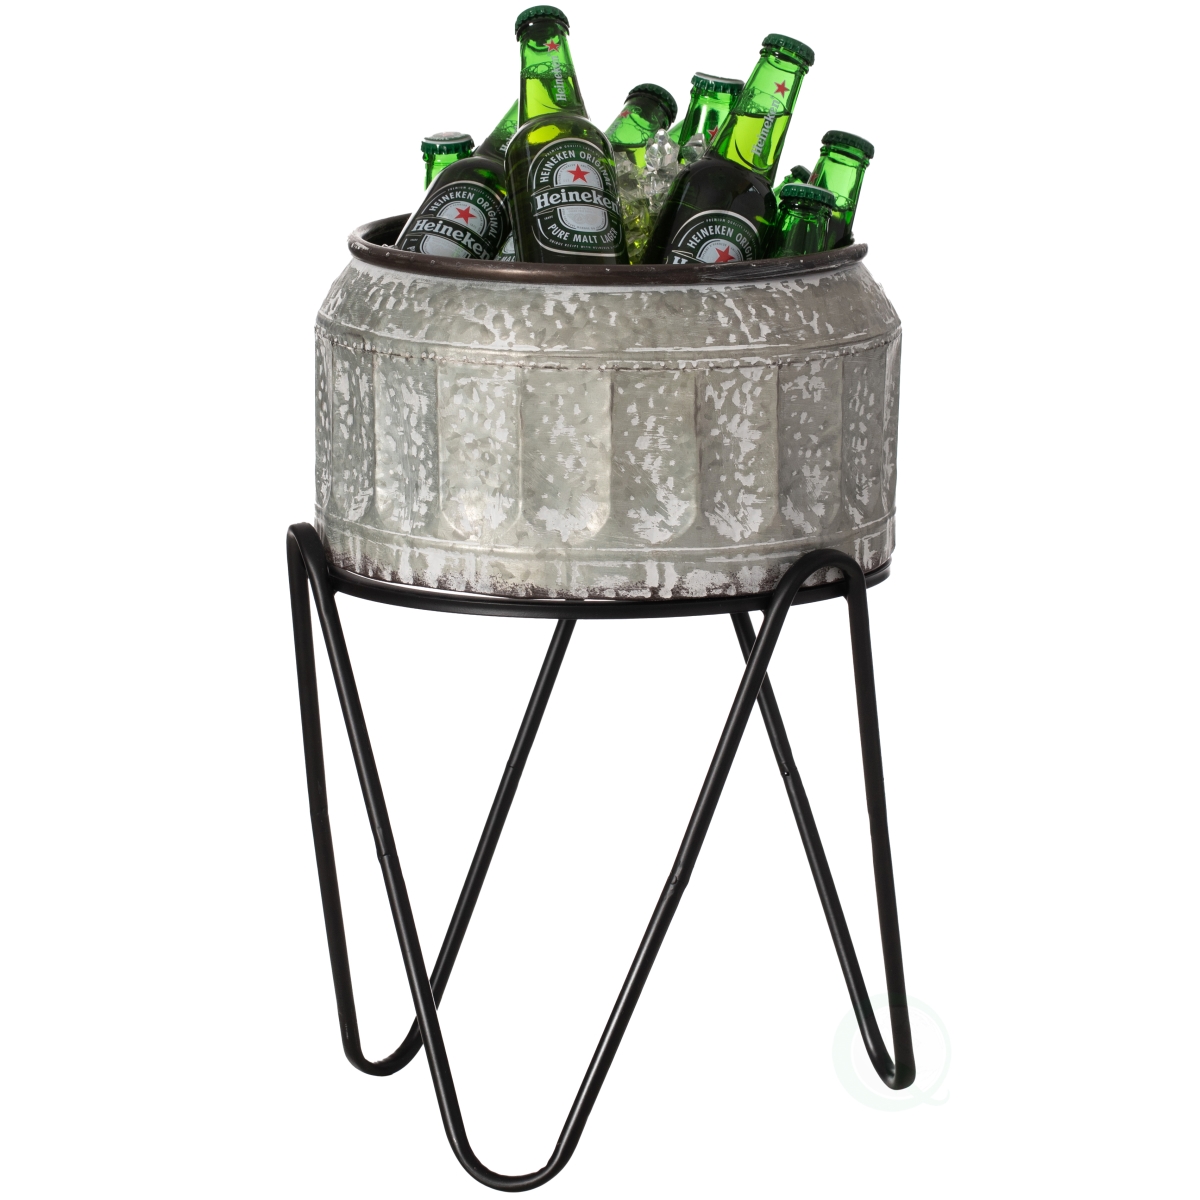 Picture of Vintiquewise QI004439.M Silver Galvanized Metal Ice Bucket Beverage Cooler Tub with Stand, Medium